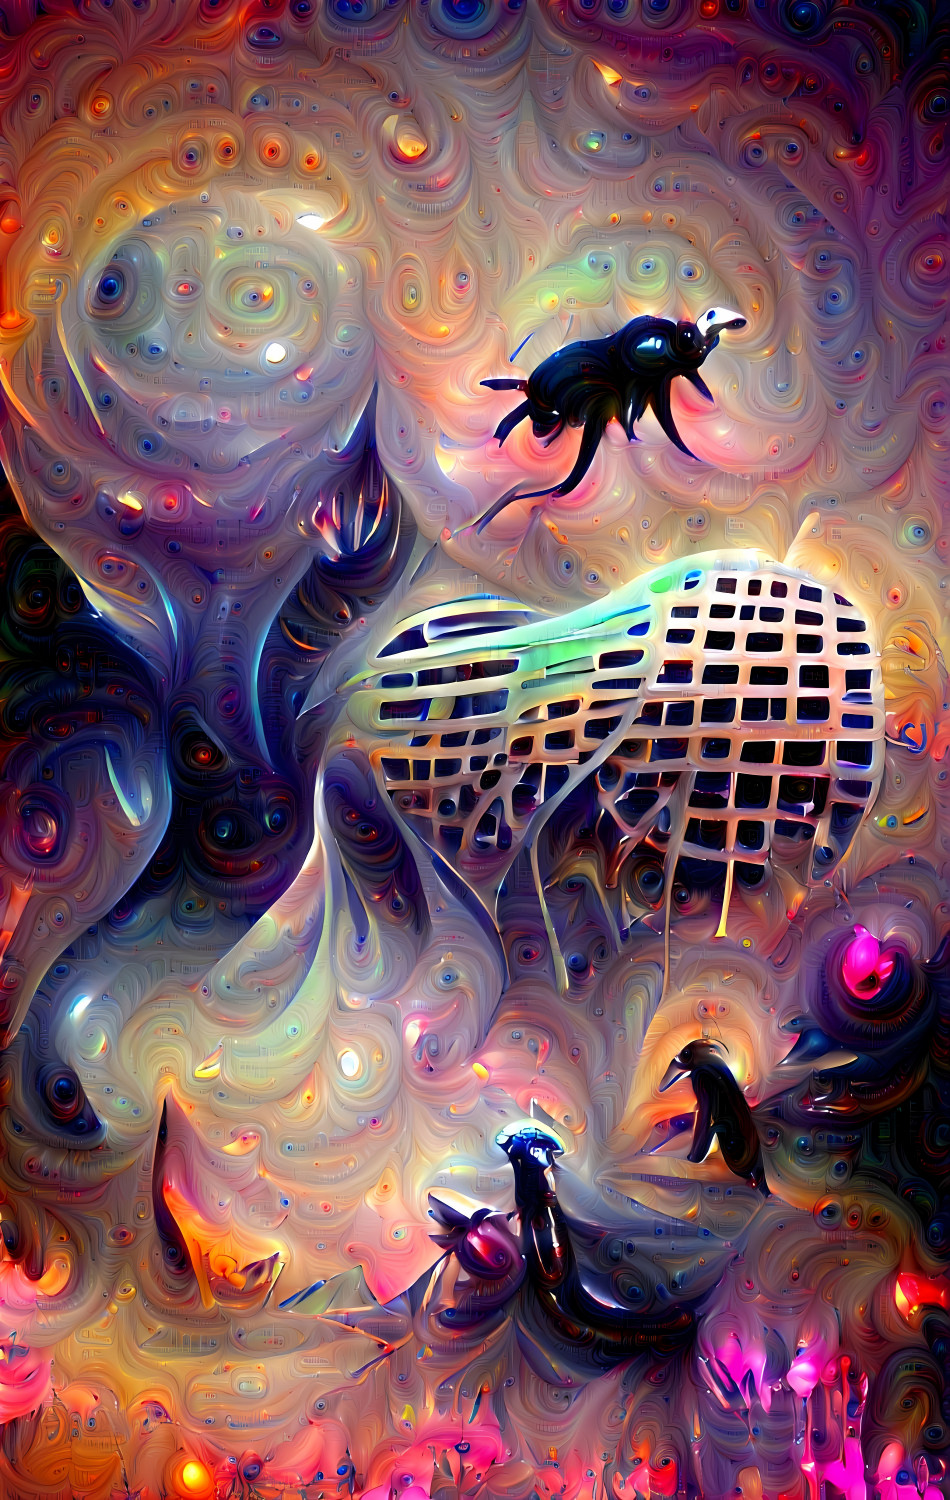 hive city with the eyes